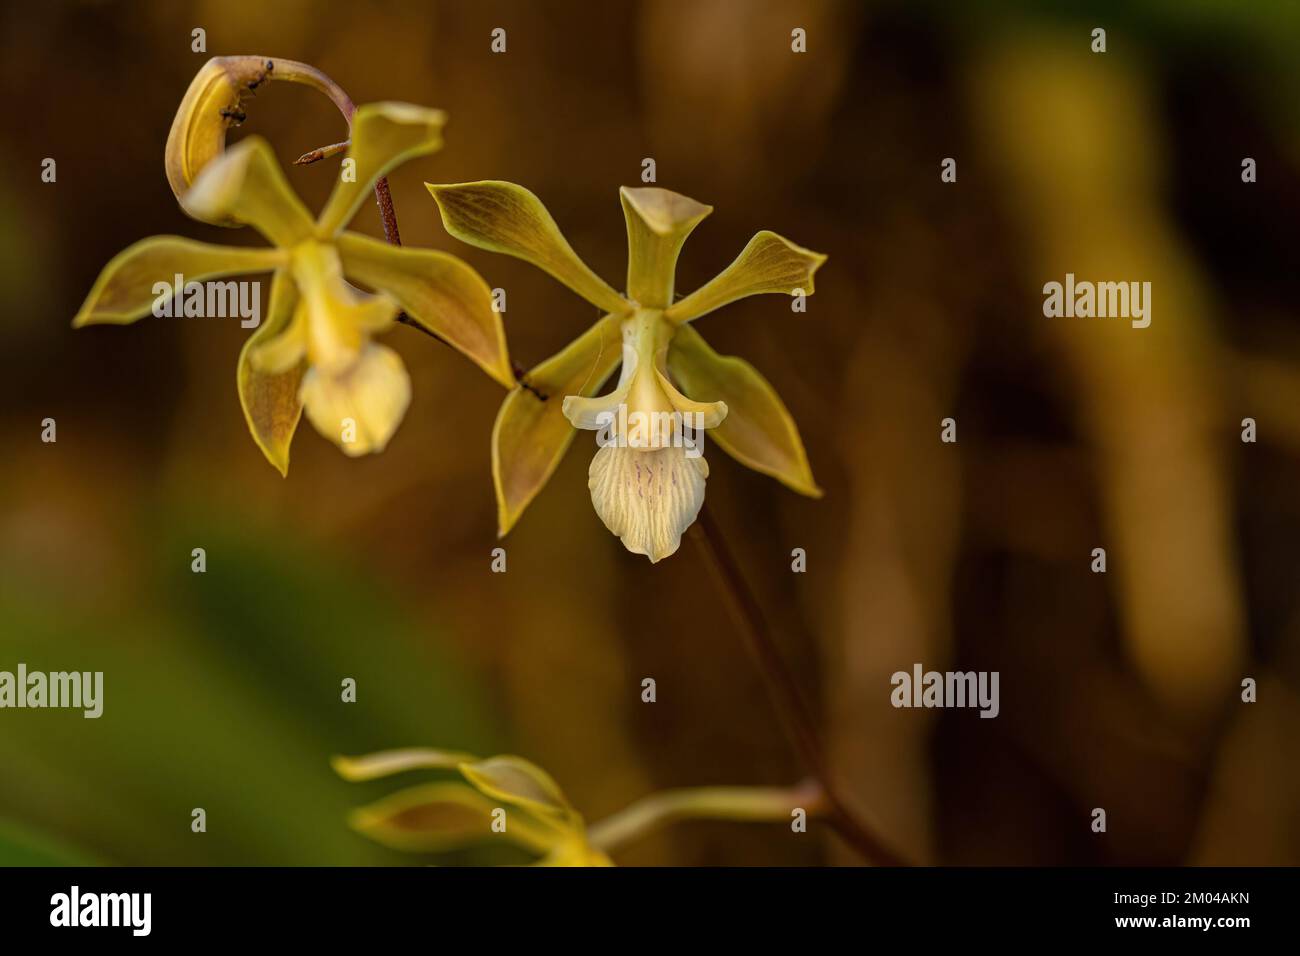 Small Orchid Flower of the Genus Encyclia Stock Photo